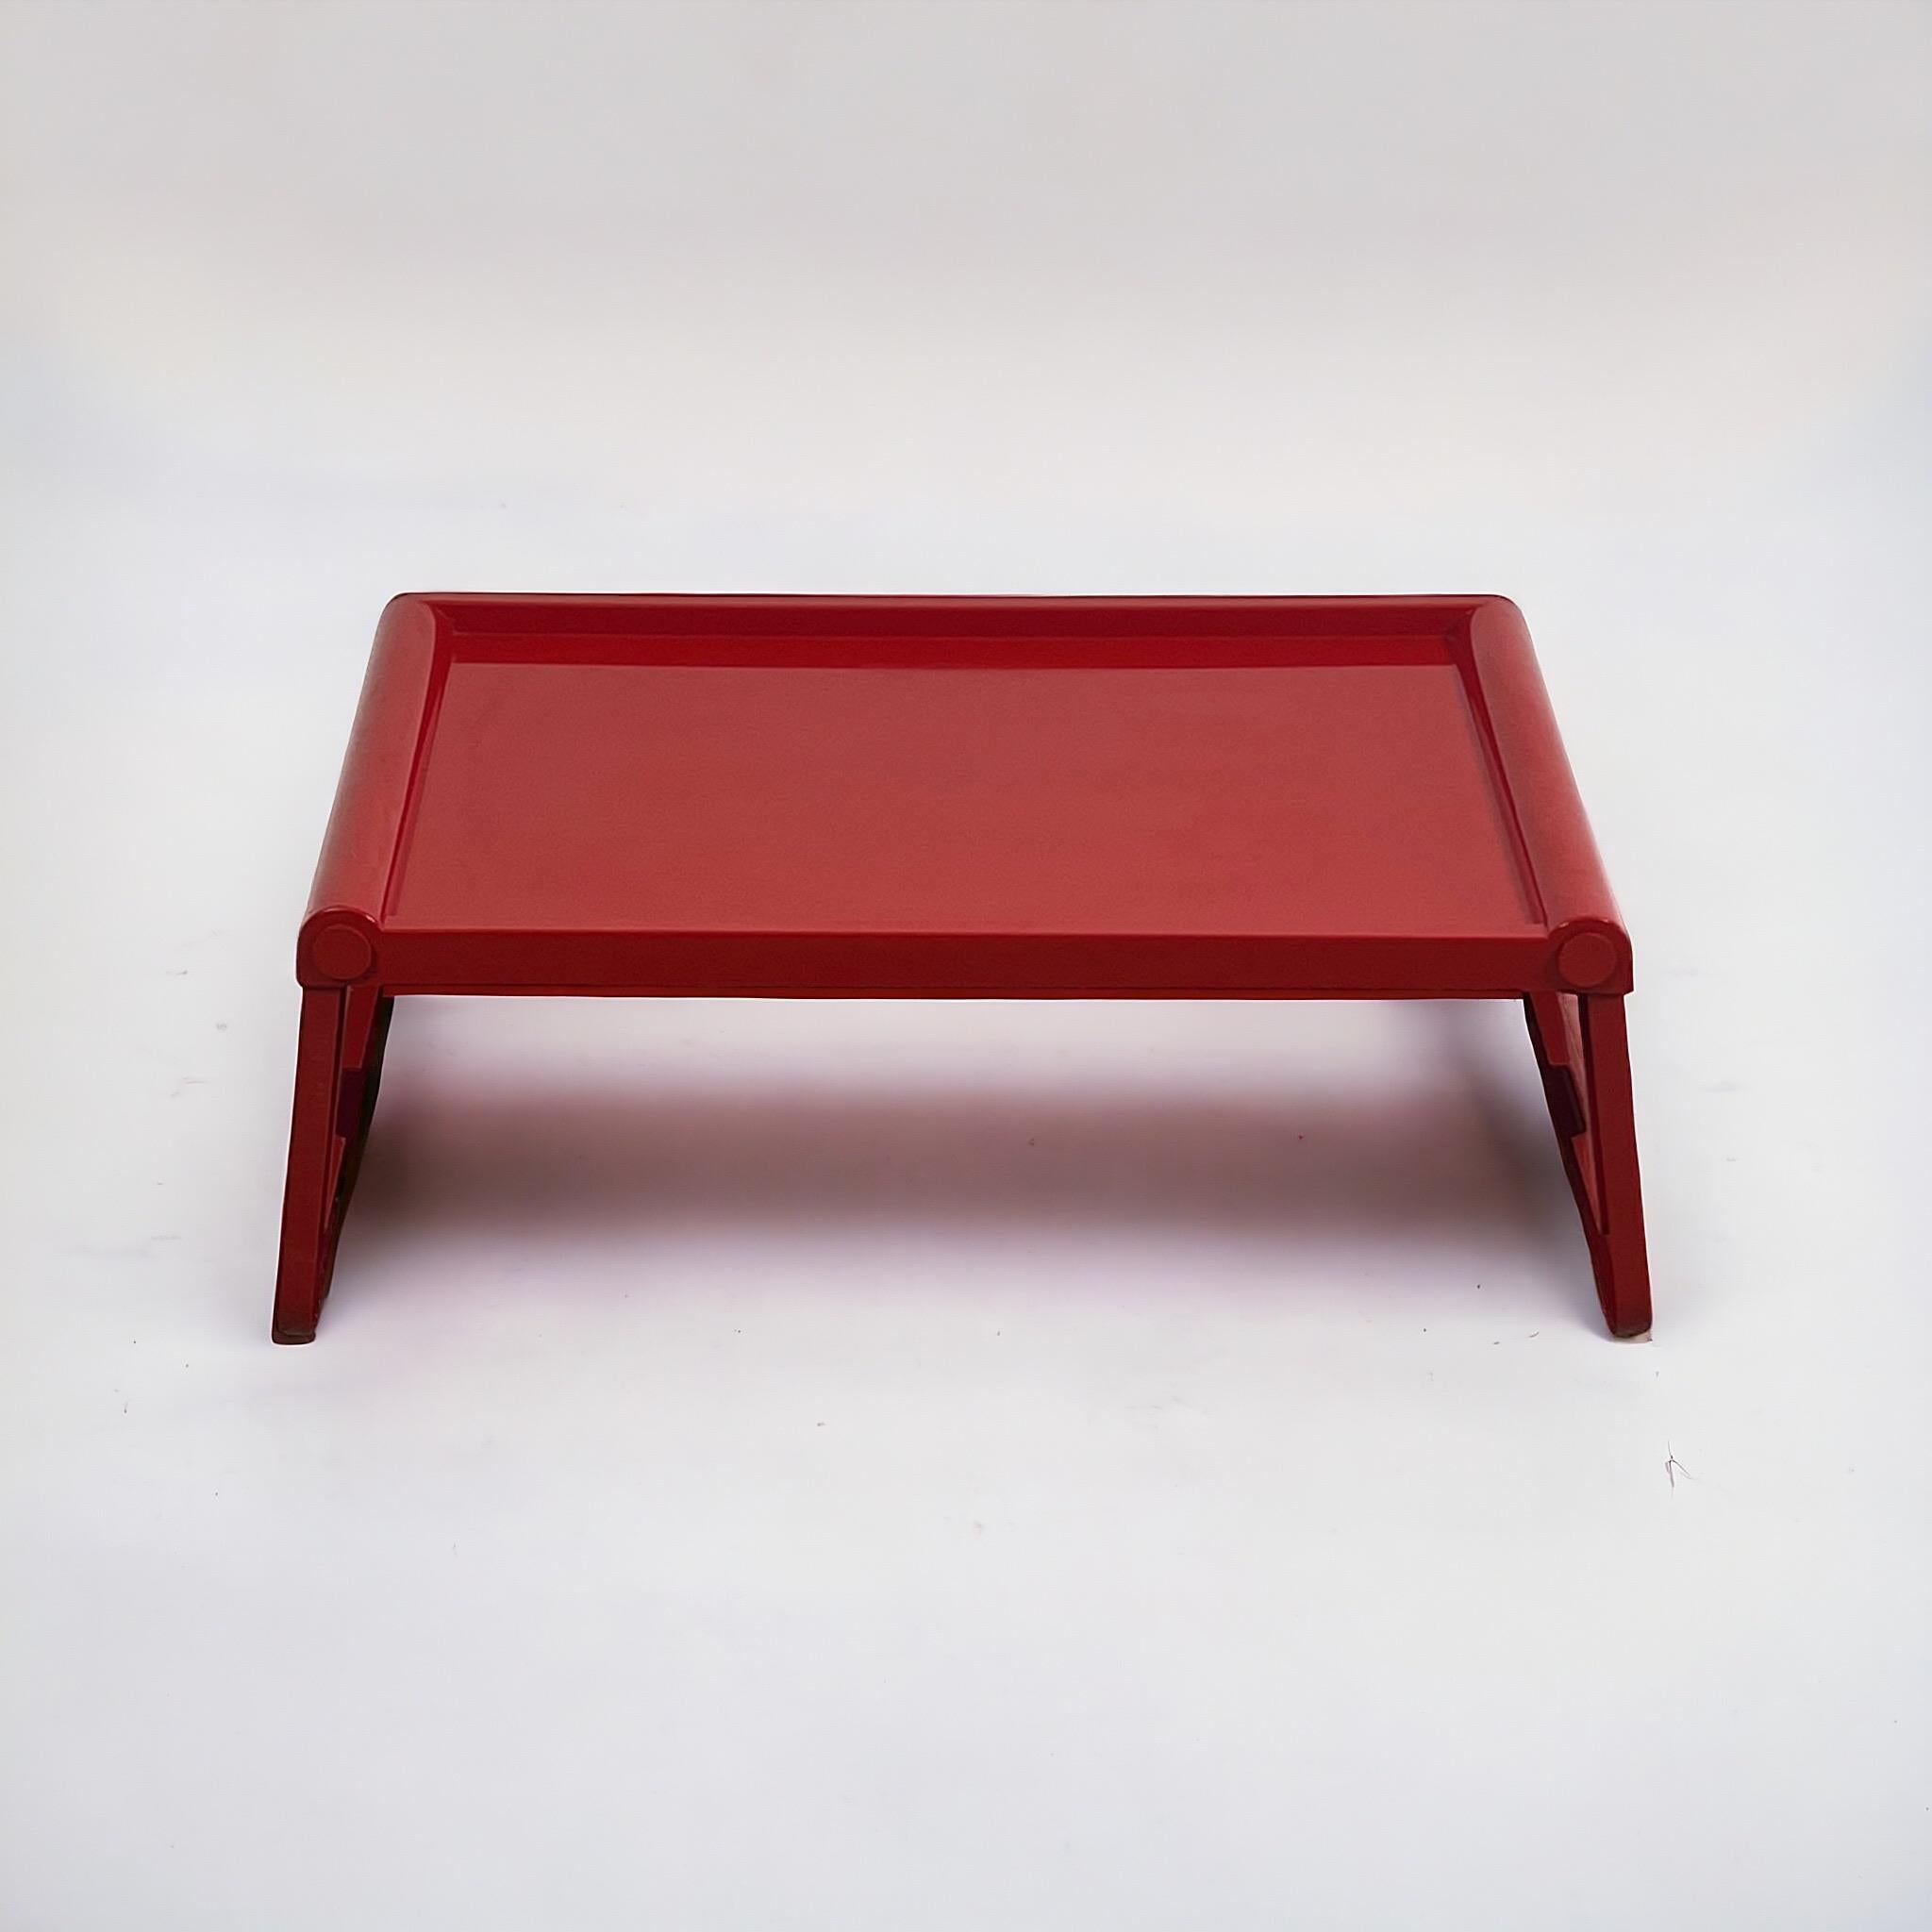 Iconic Tray Table 'Jolly' by Luigi Massoni for Guzzini in Glossy Red , 1970s For Sale 1